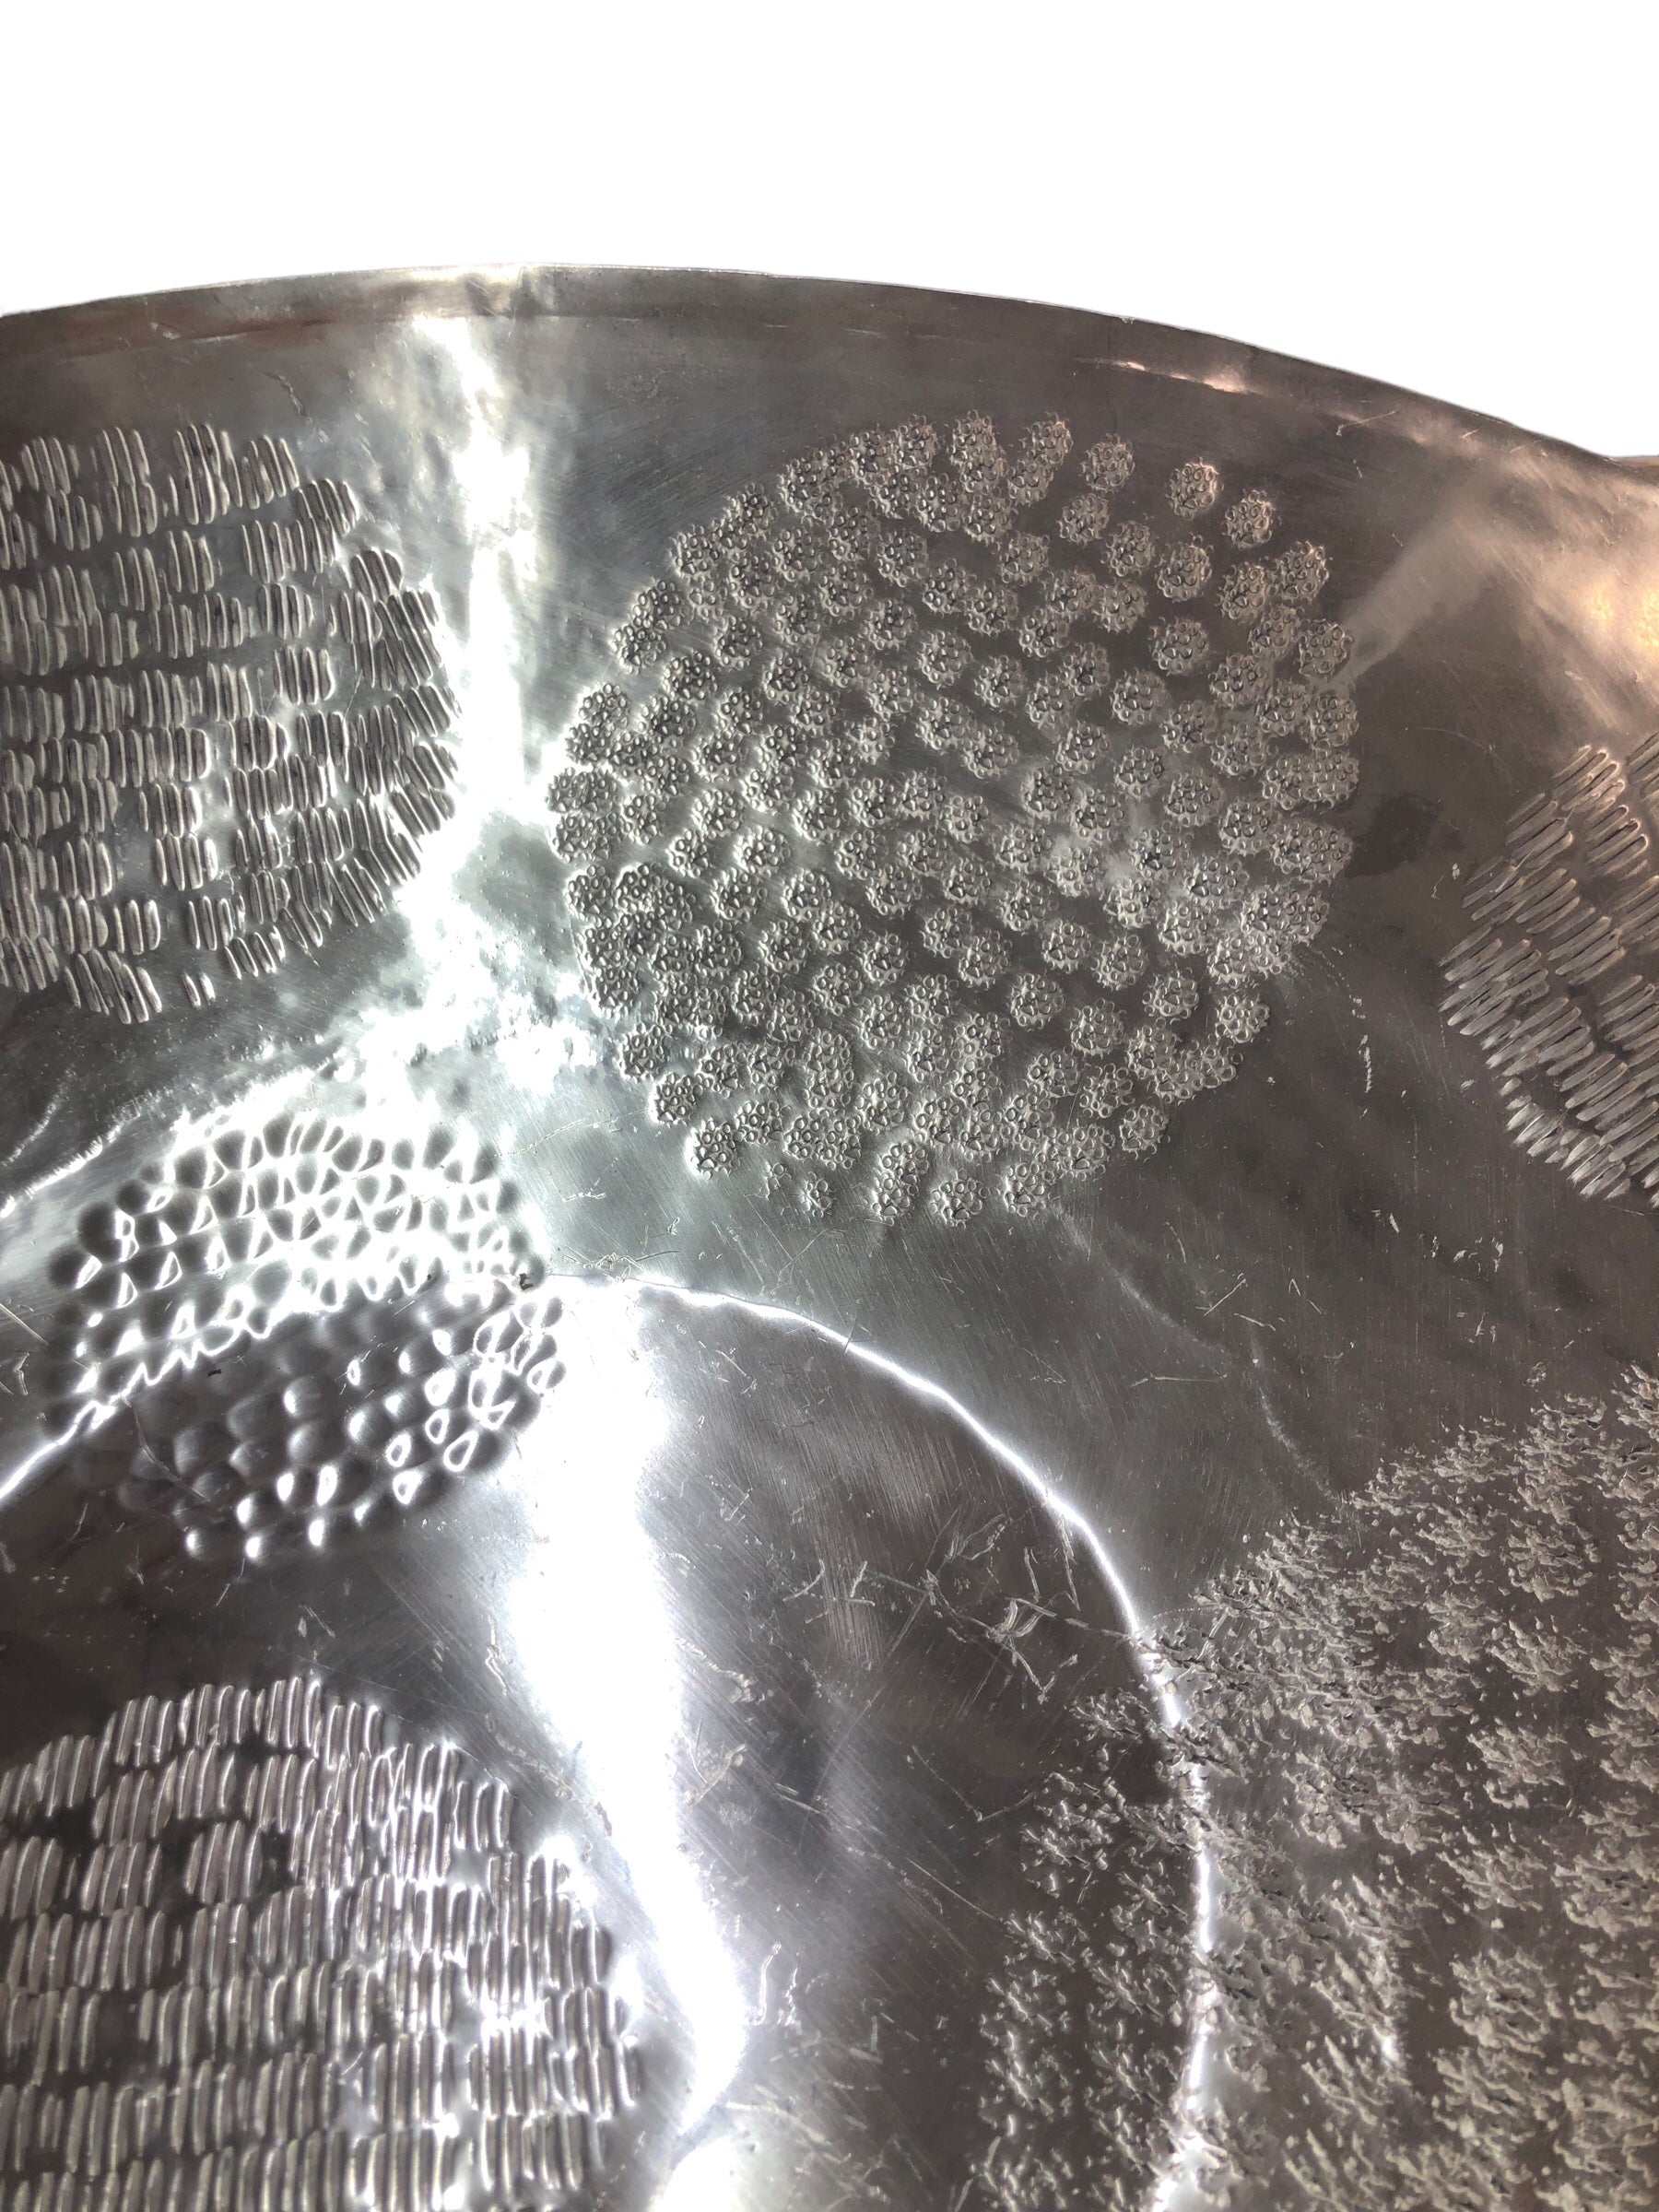 Extra Large Silver Bowl with Pattern